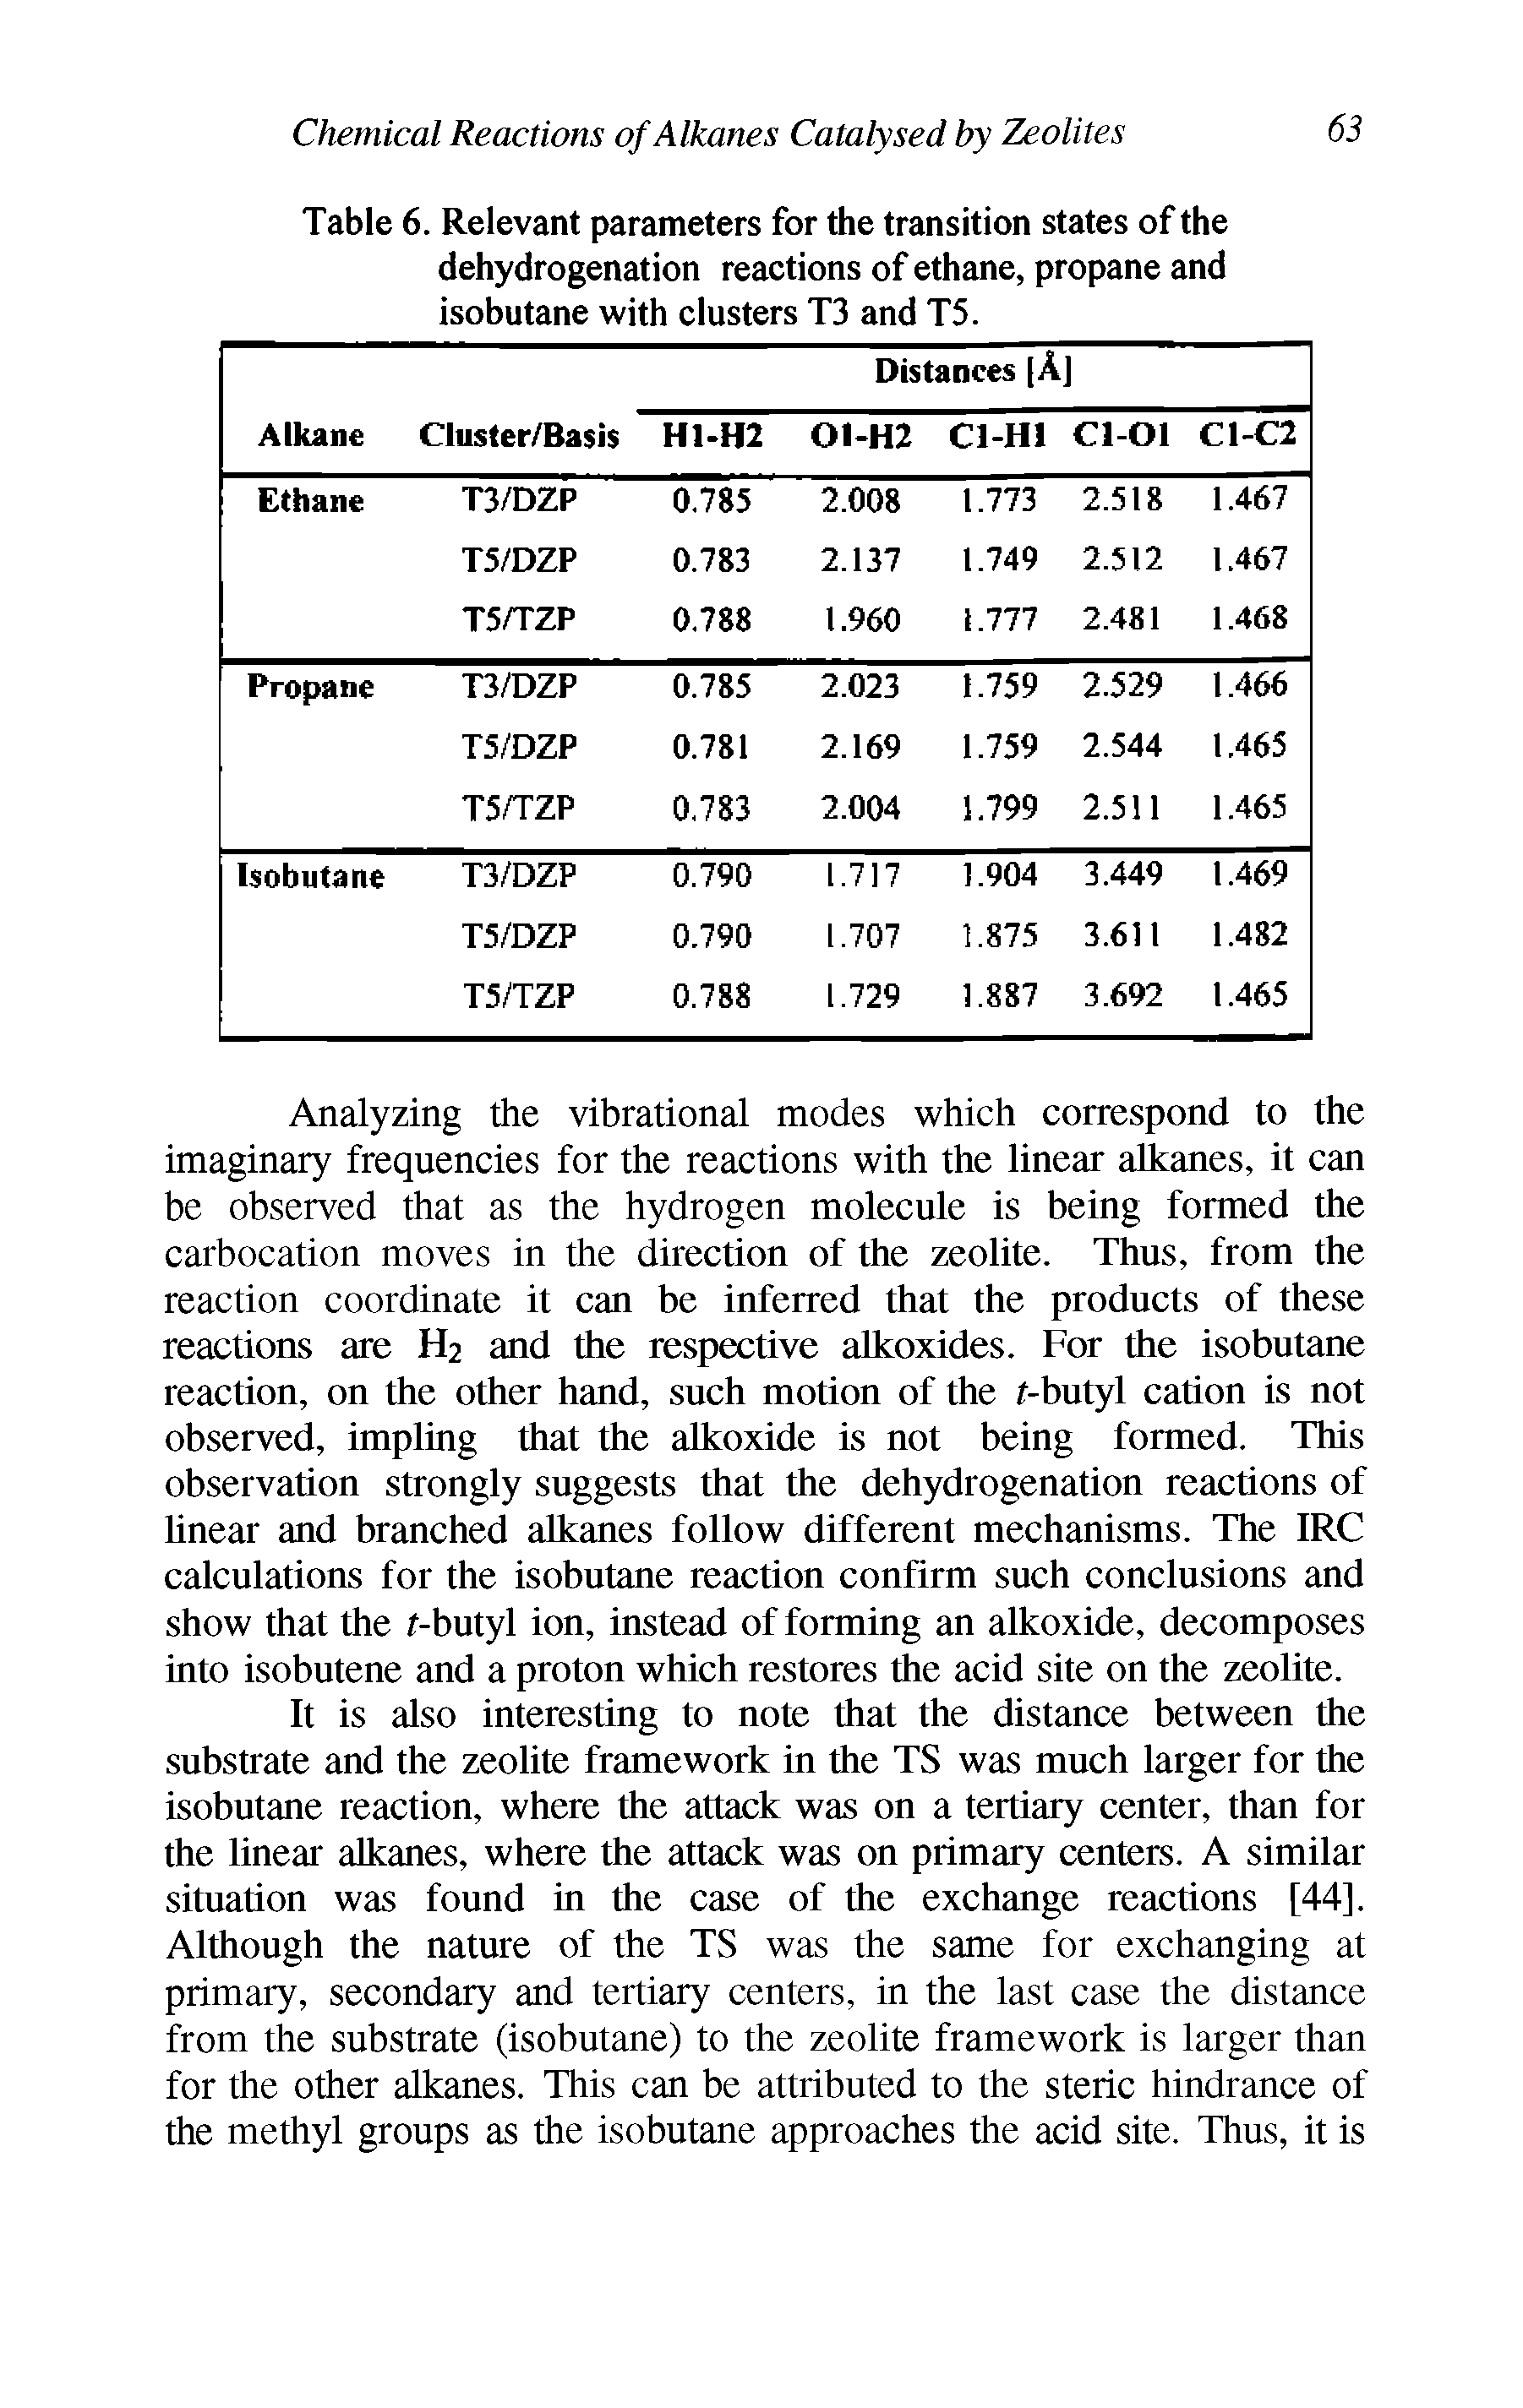 Table 6. Relevant parameters for the transition states of the dehydrogenation reactions of ethane, propane and isobutane with clusters T3 and T5.